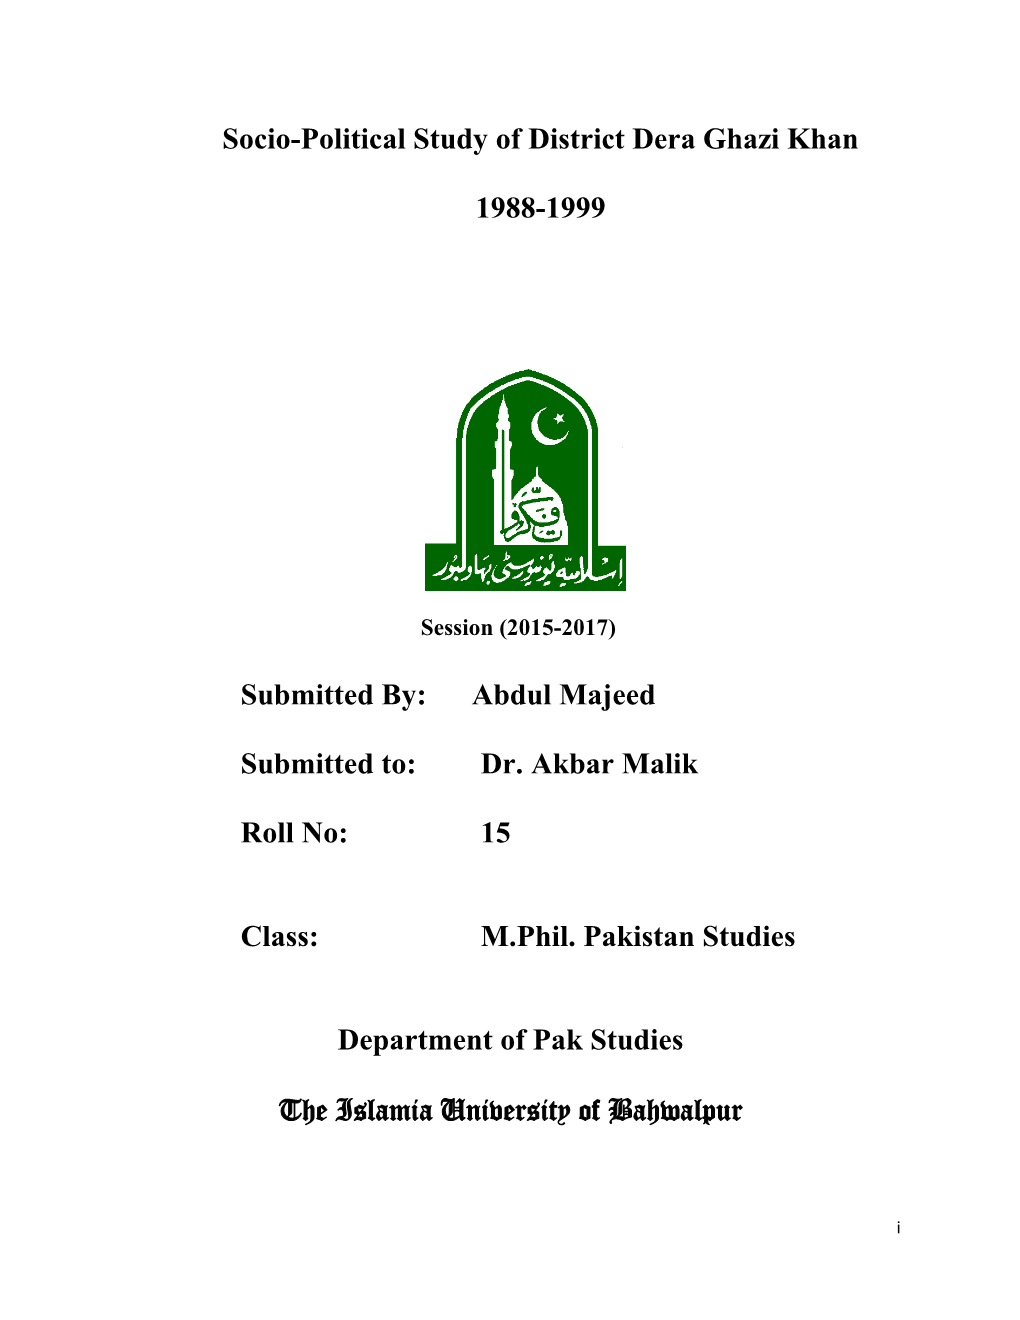 Socio-Political Study of District Dera Ghazi Khan 1988-1999 Submitted By